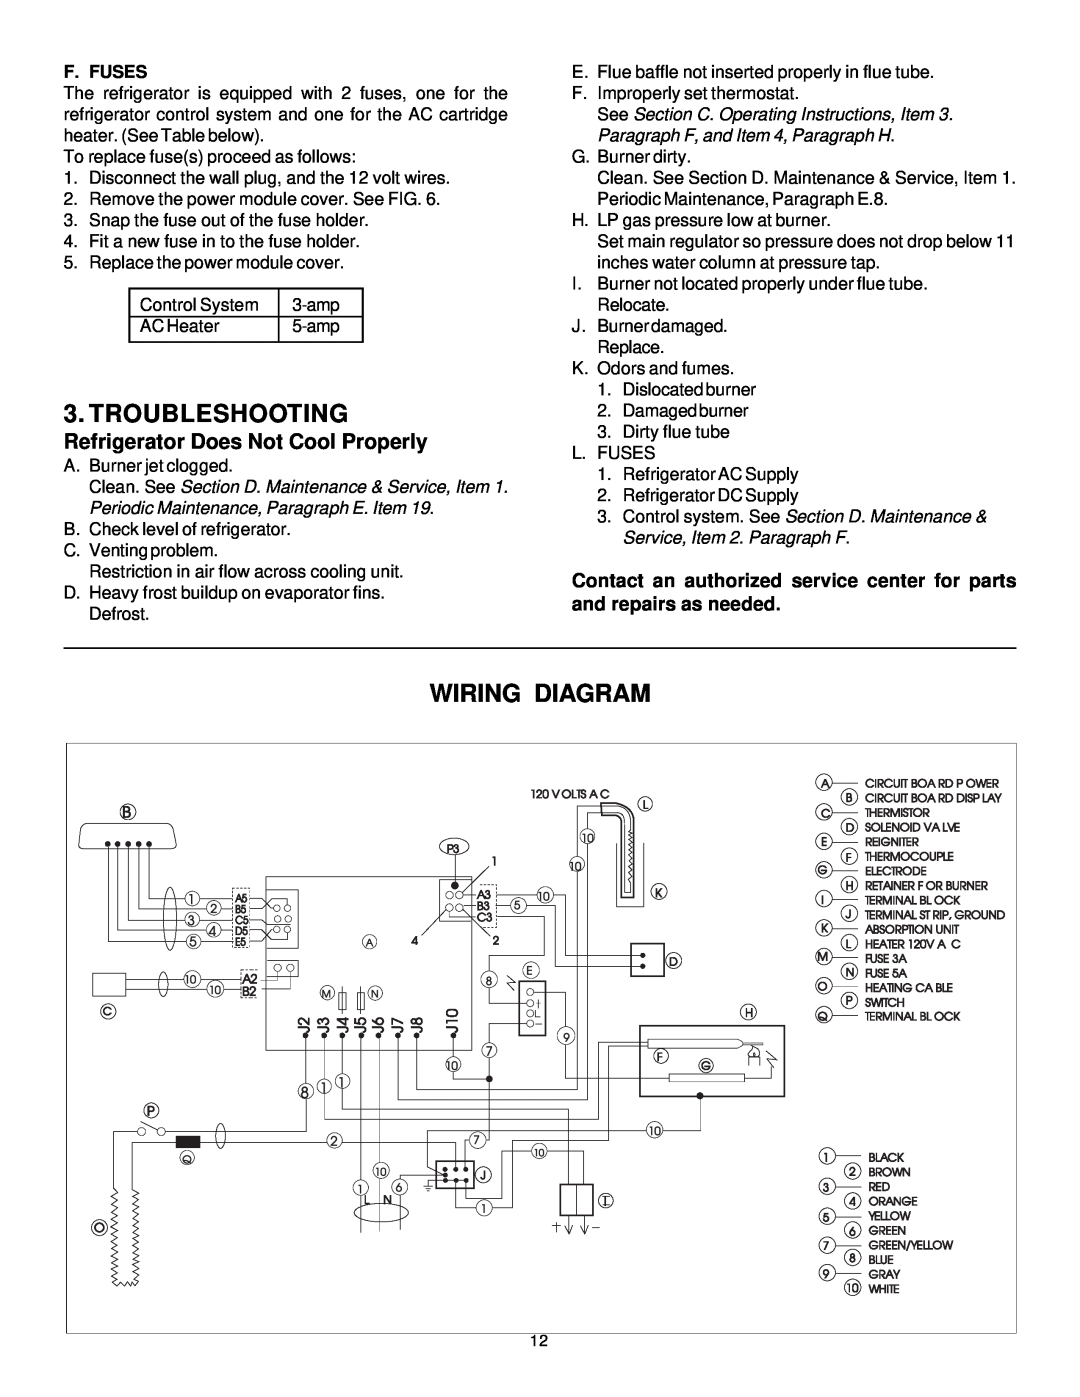 Dometic RM2612, RM2812 manual Troubleshooting, Wiring Diagram, Refrigerator Does Not Cool Properly, F. Fuses 